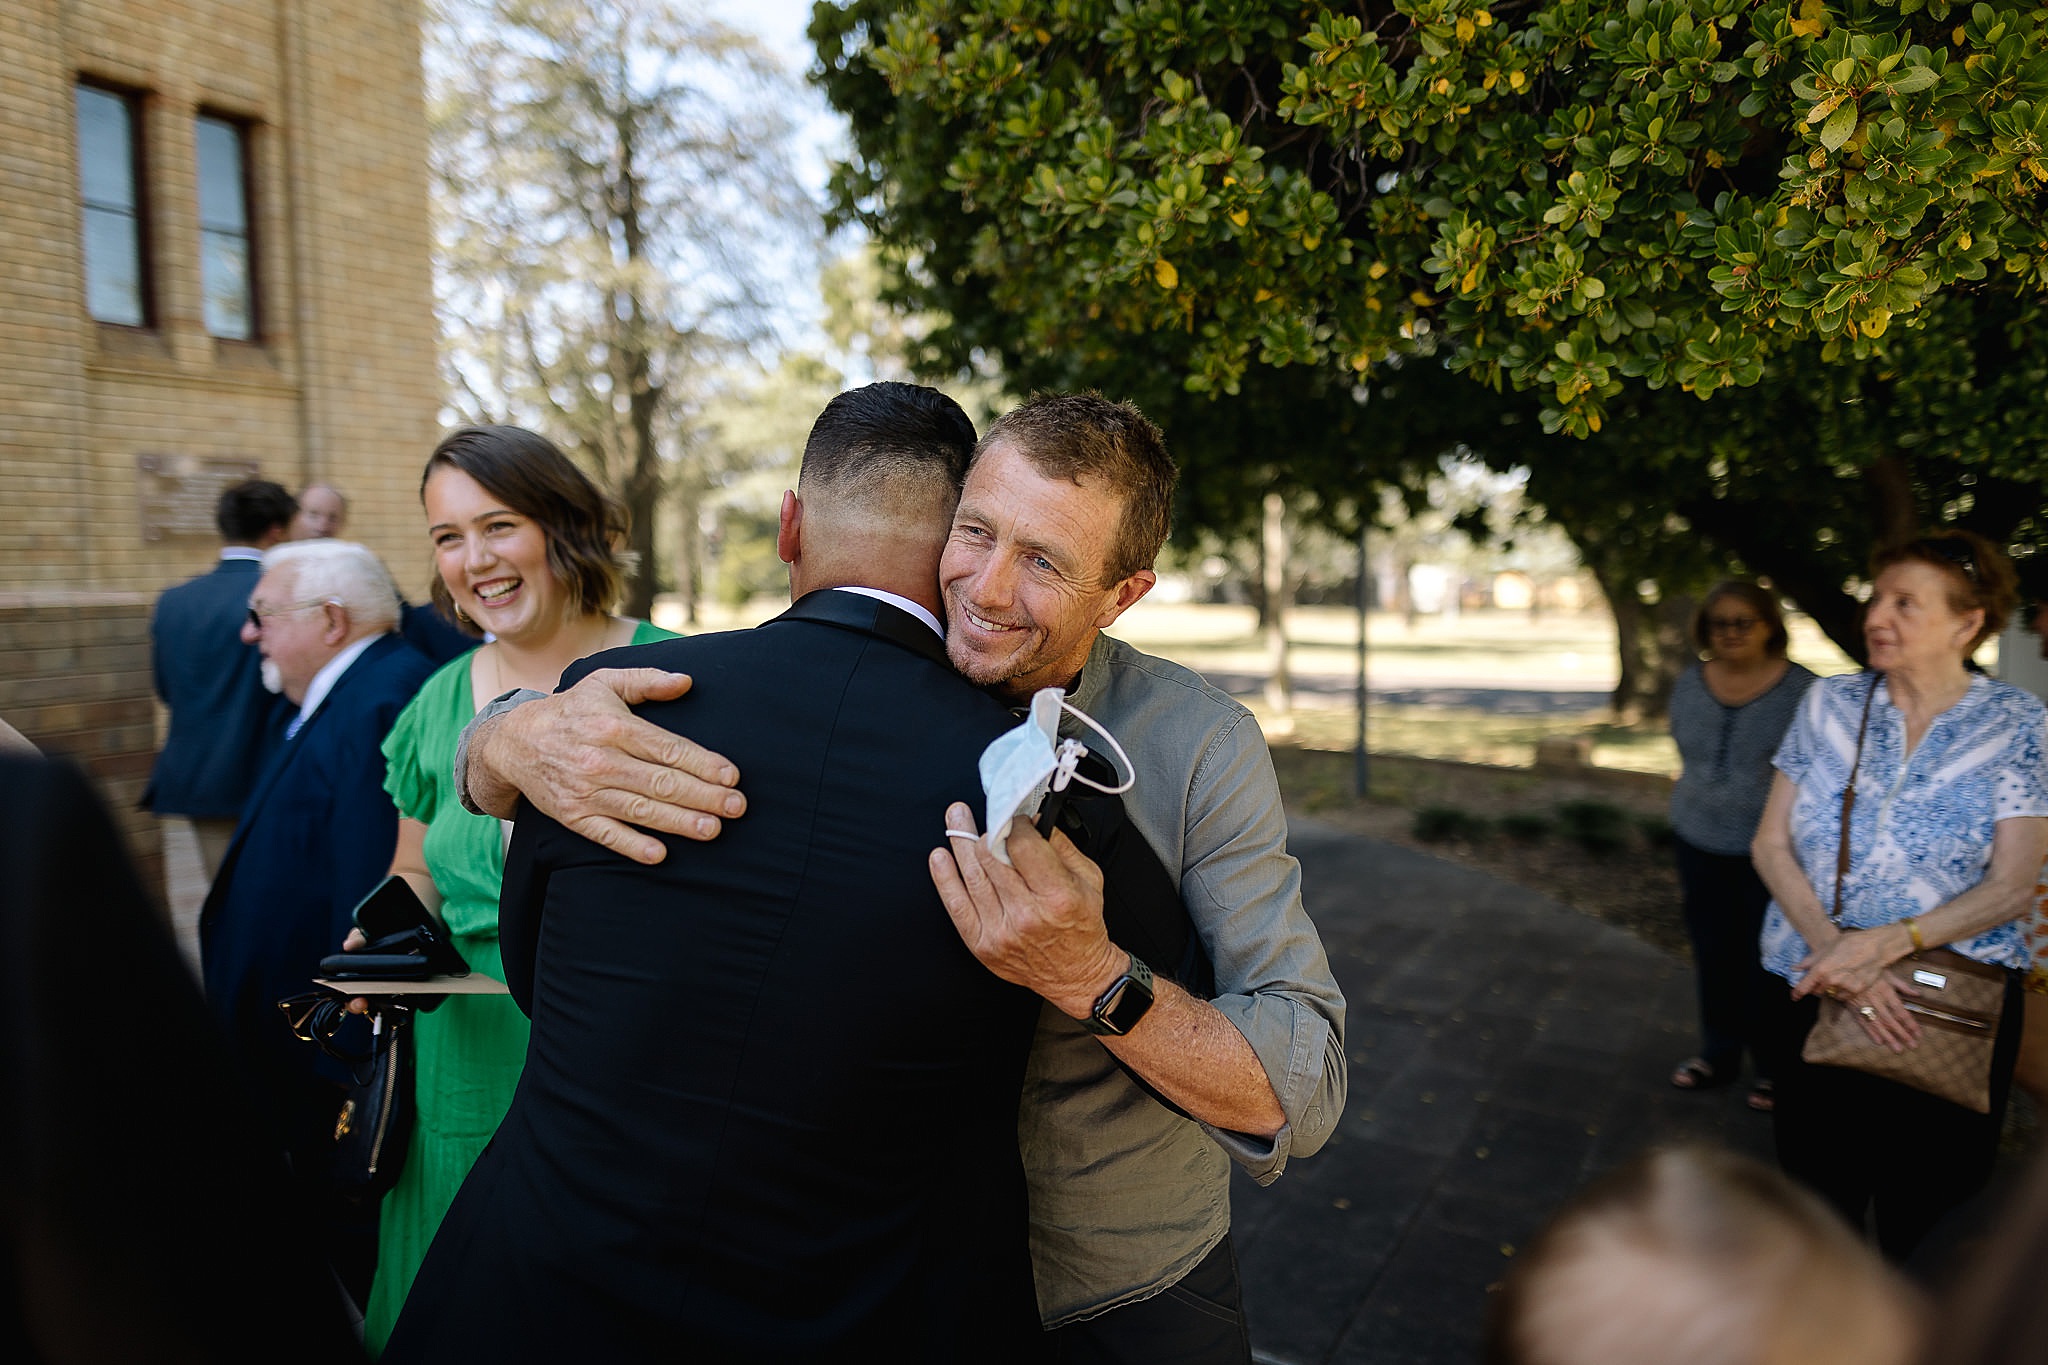 canberra weddings,ACT weddings,ACT wedding photographer,Keepsakephoto by the Keeffes,Canberra Wedding Photographer,Canberra Wedding Photography,Wiluna studio,The social club,made with love bridal,La Ombre Creations,Canberra Portrait Photography,